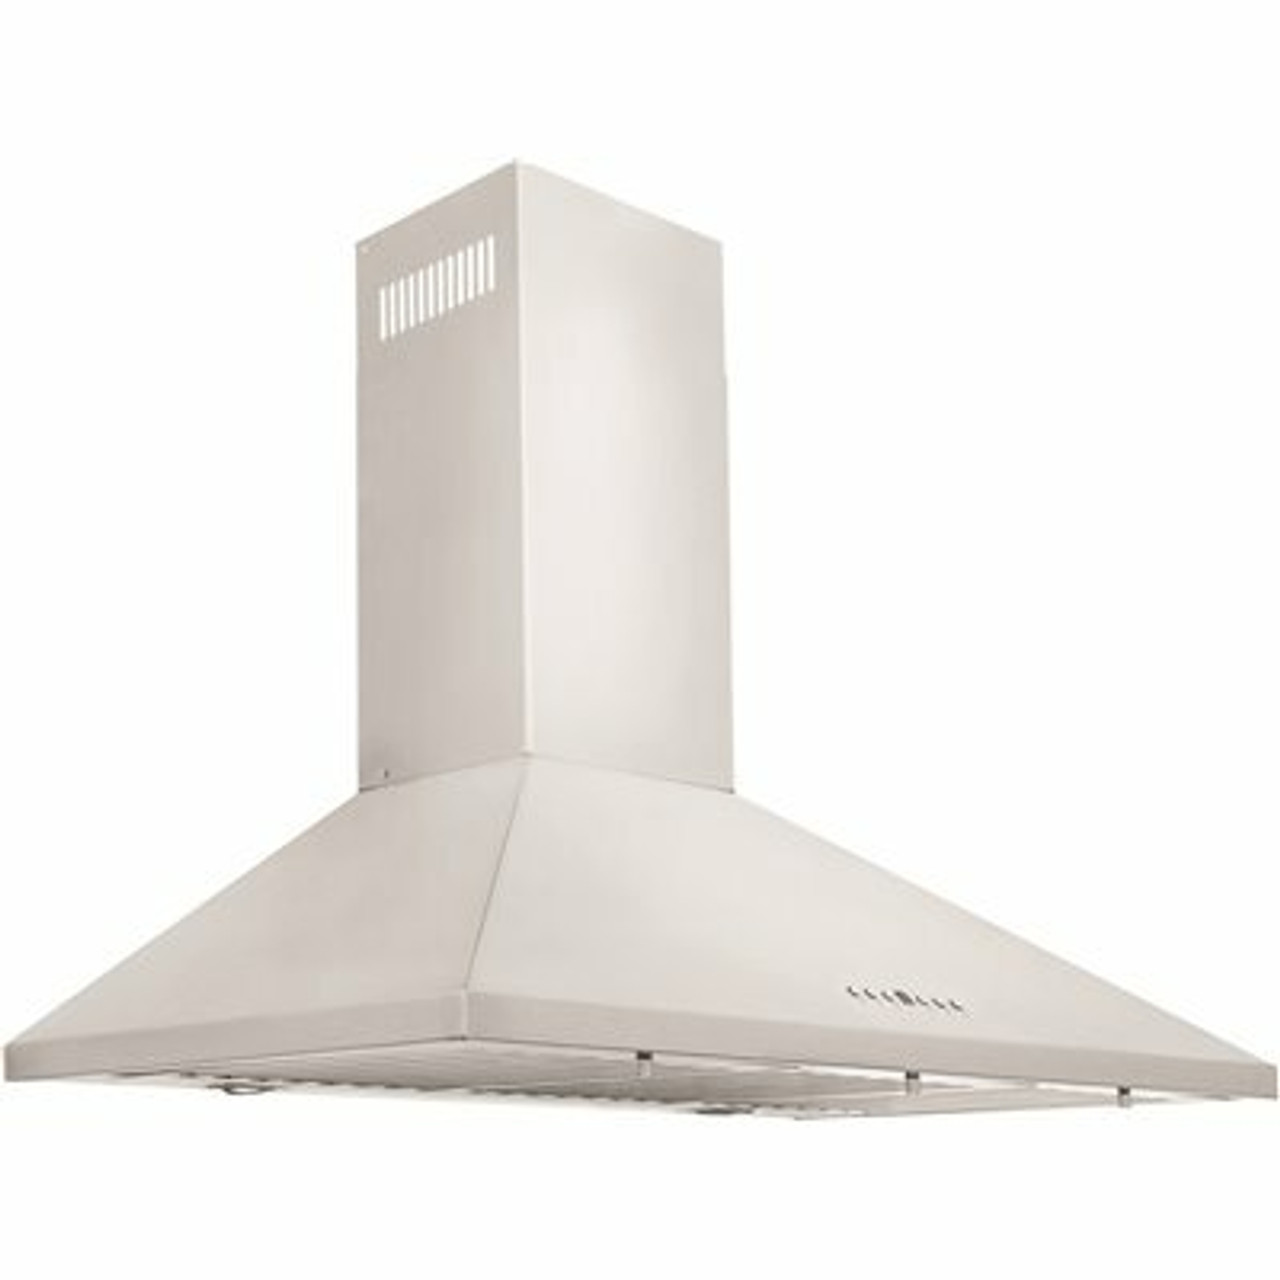 Zline Kitchen And Bath 30 In. Convertible Vent Wall Mount Range Hood In Stainless Steel (Kl2-30)